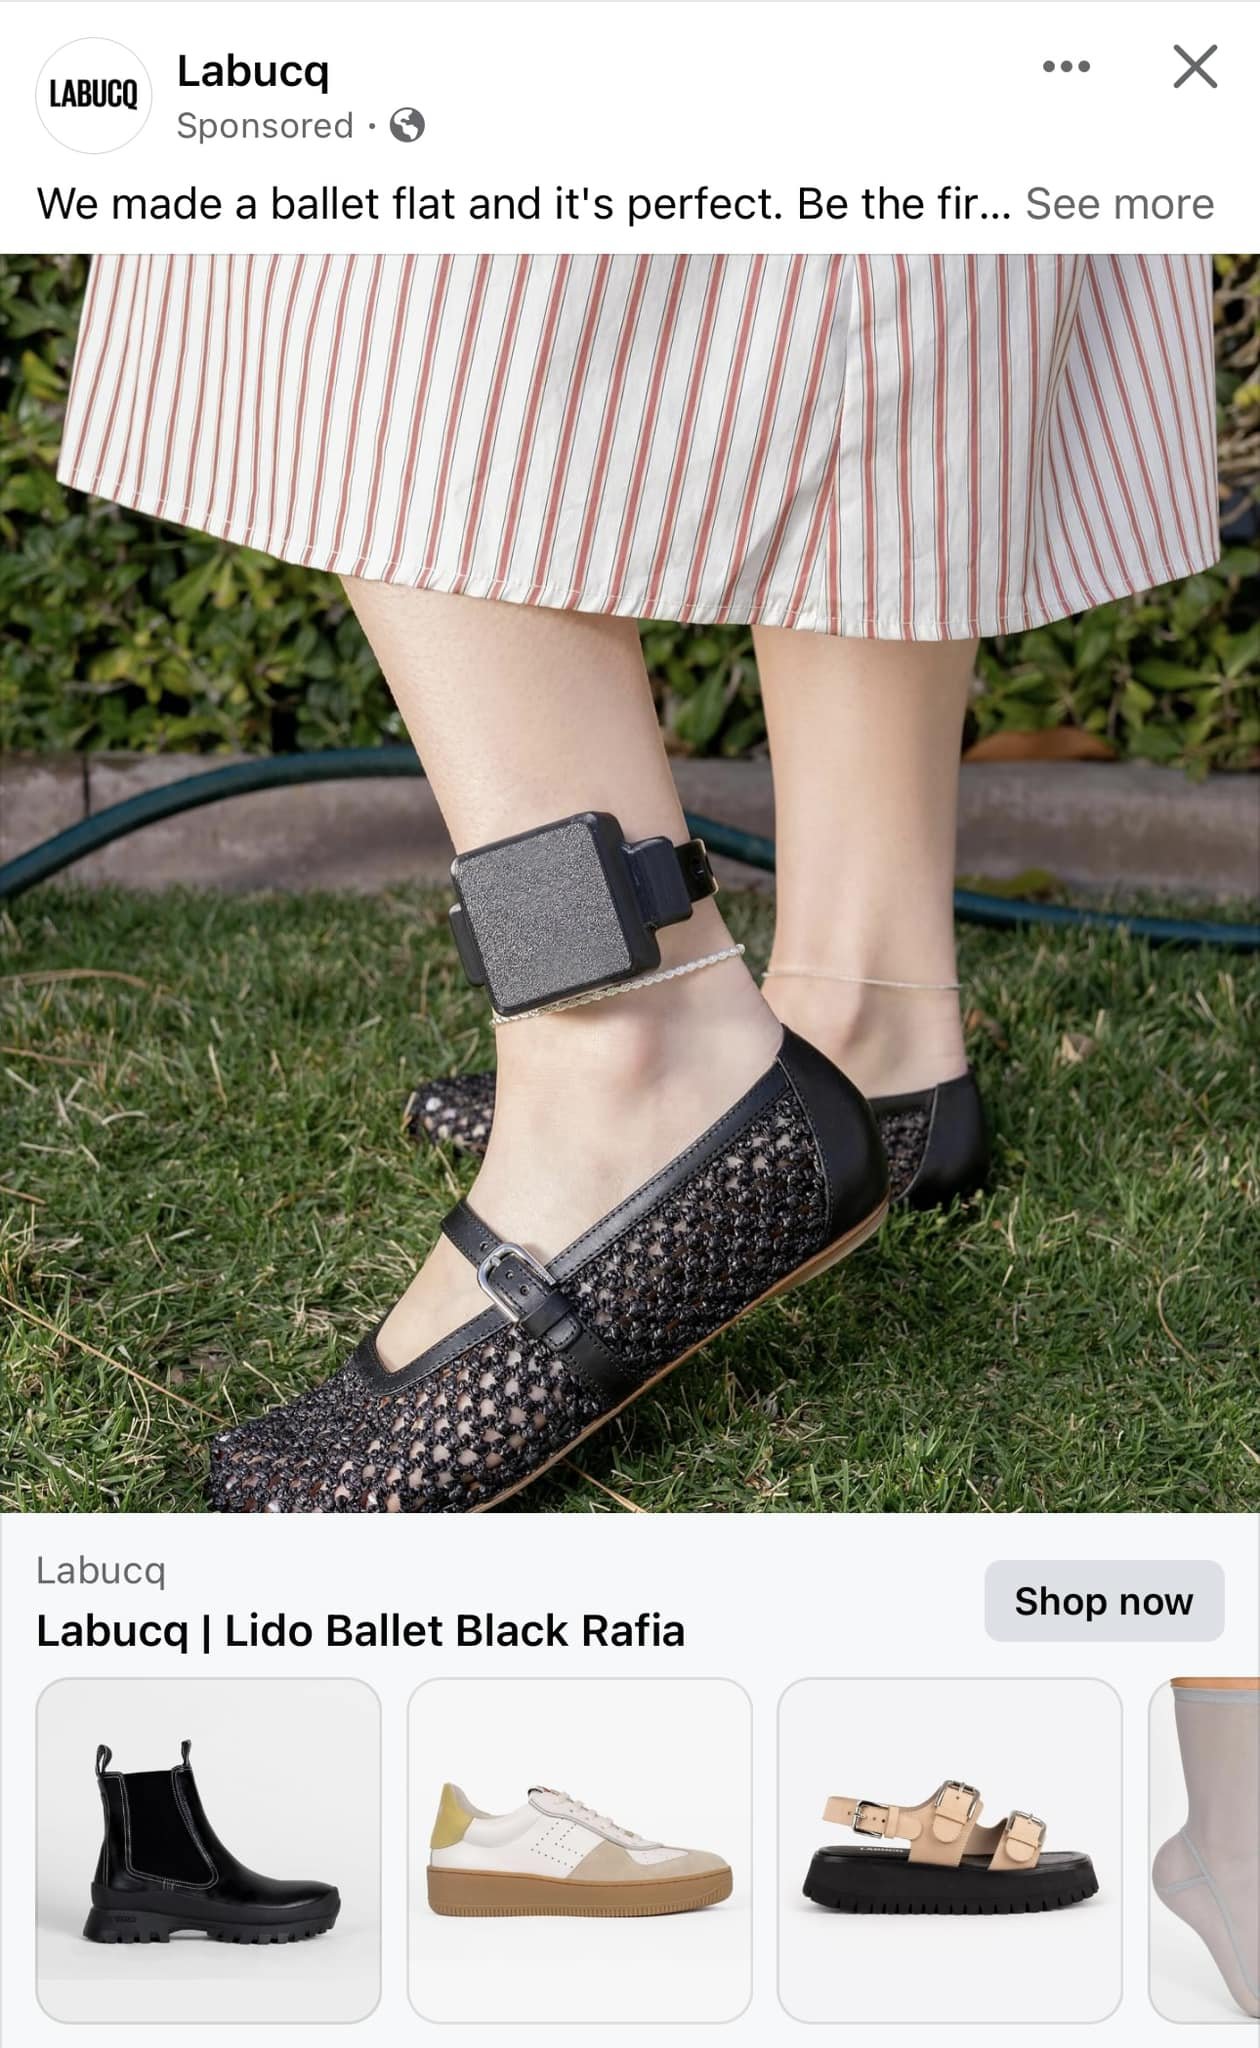 Algorithm fail or FB knows something I don&rsquo;t know? Either way, now I know where to get a ballet rafia flat during house arrest.